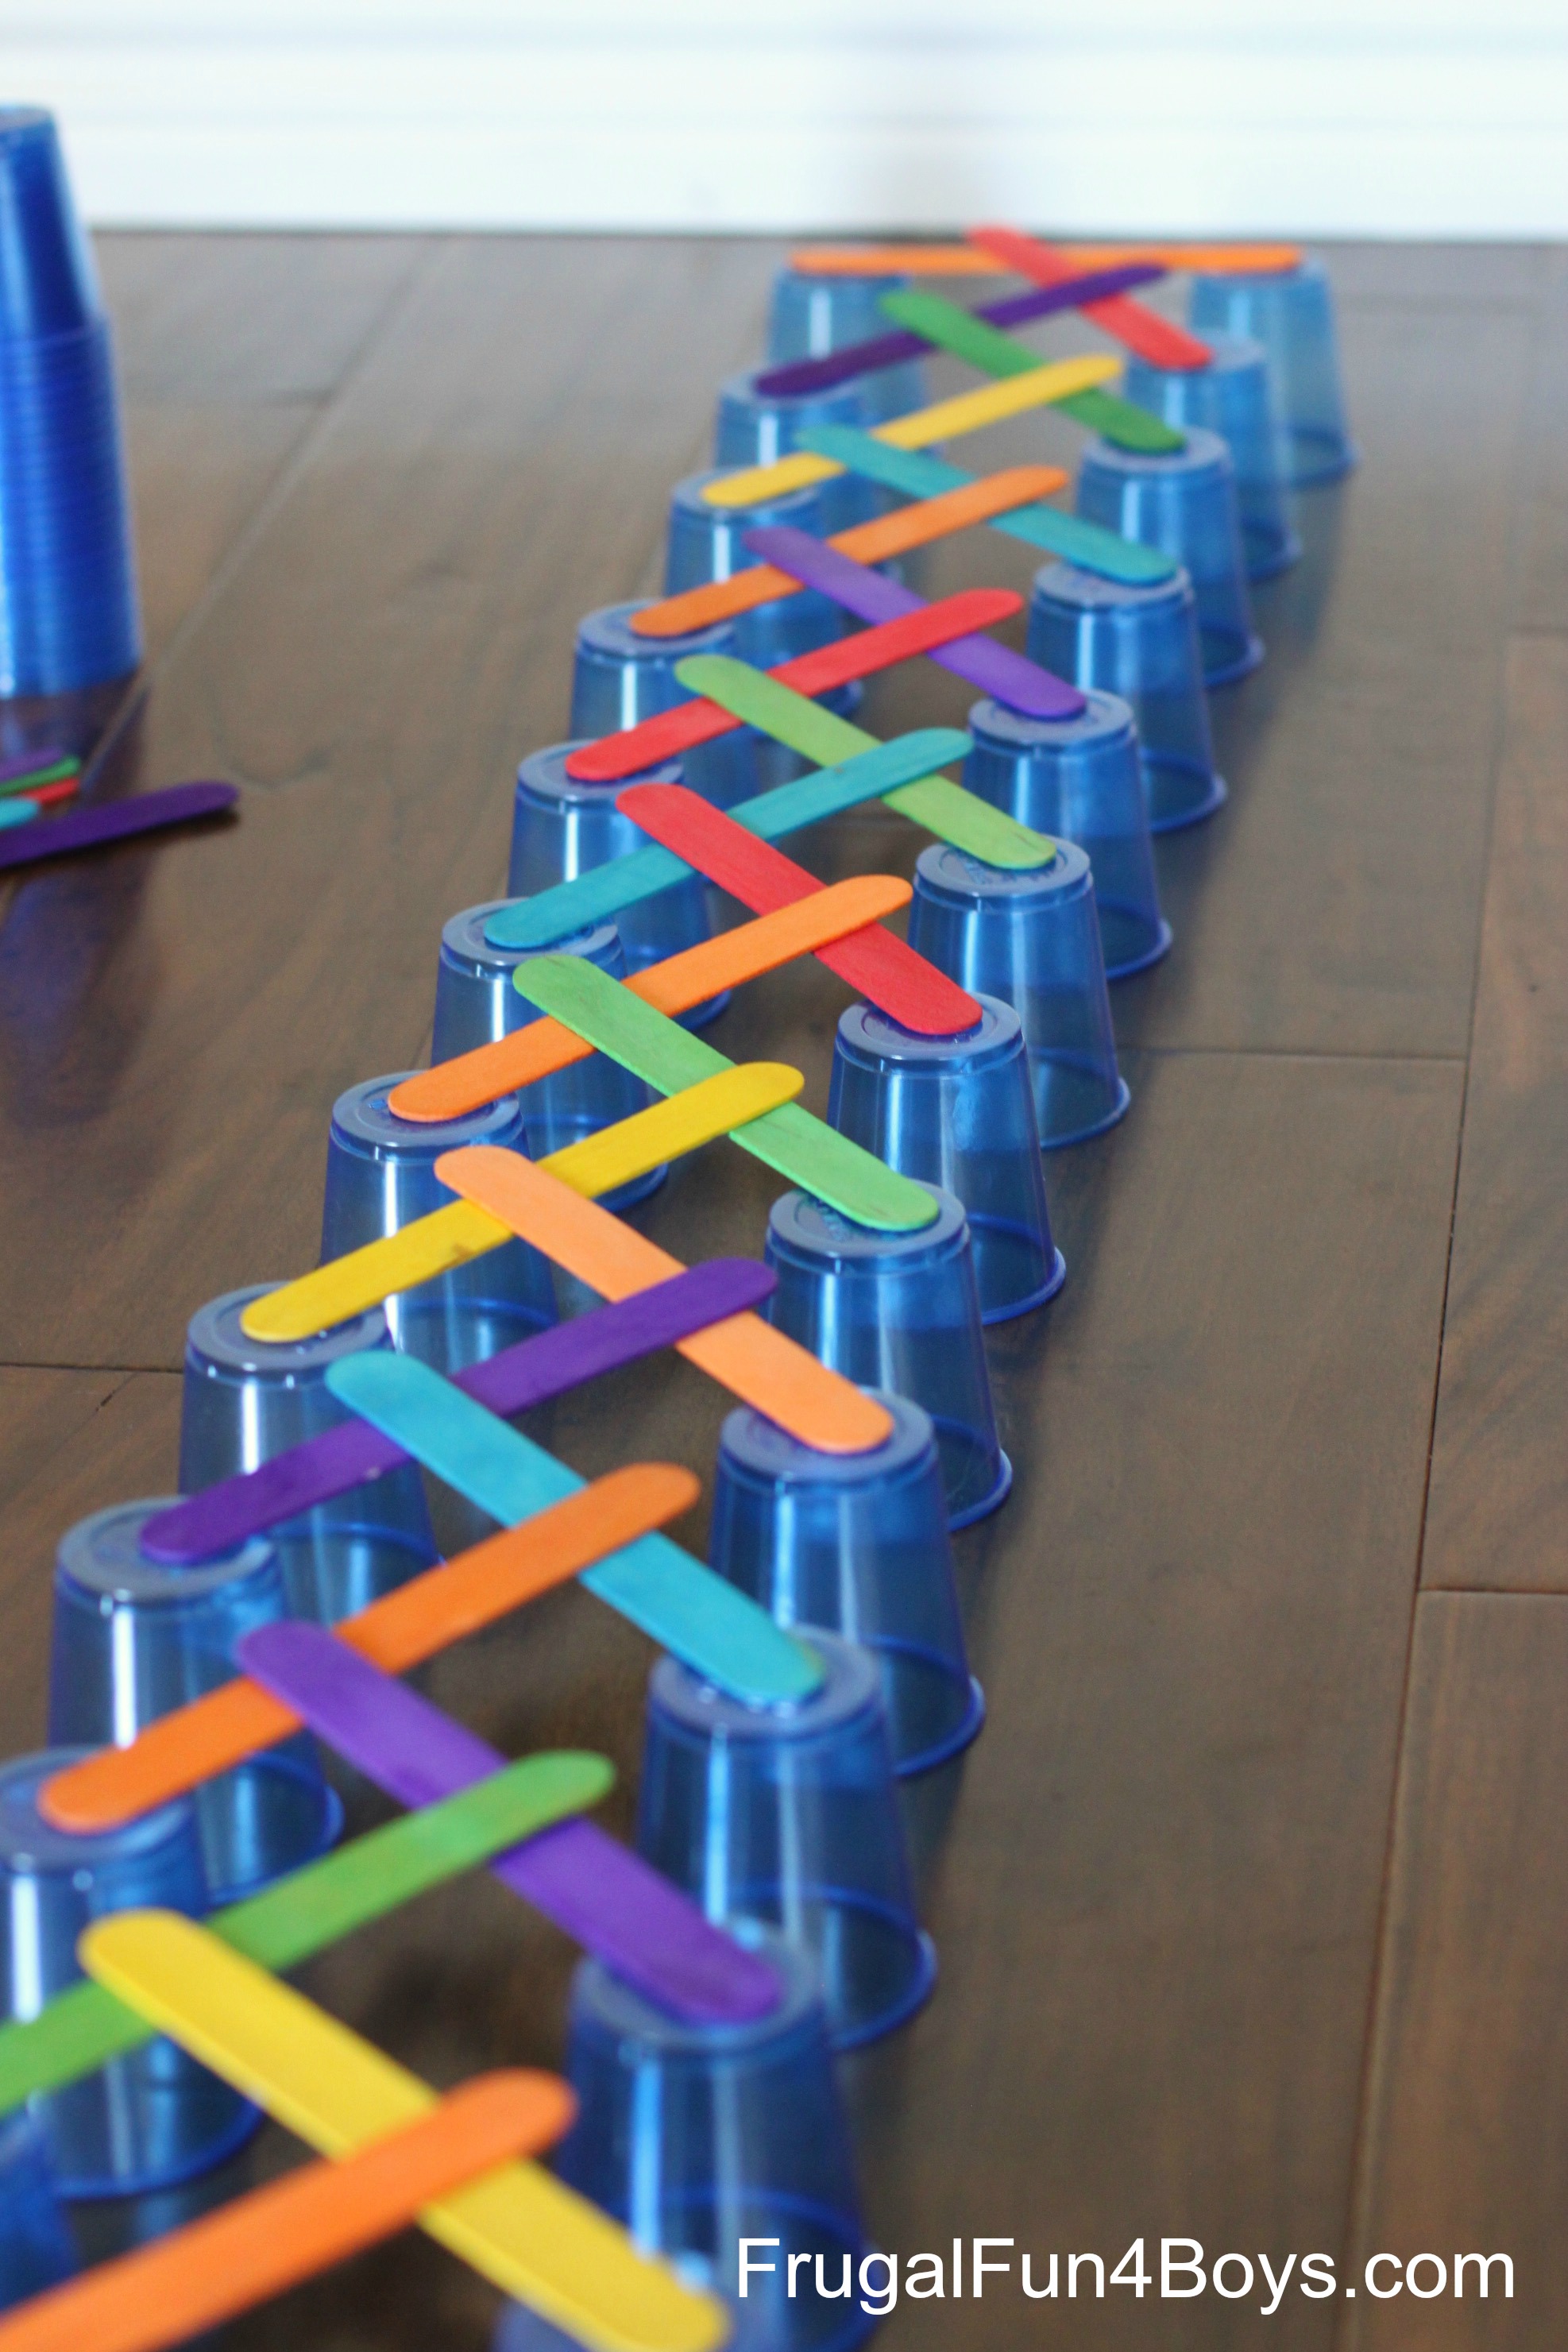 4 Engineering Challenges for Kids - with Cups, Craft Sticks, and Cubes